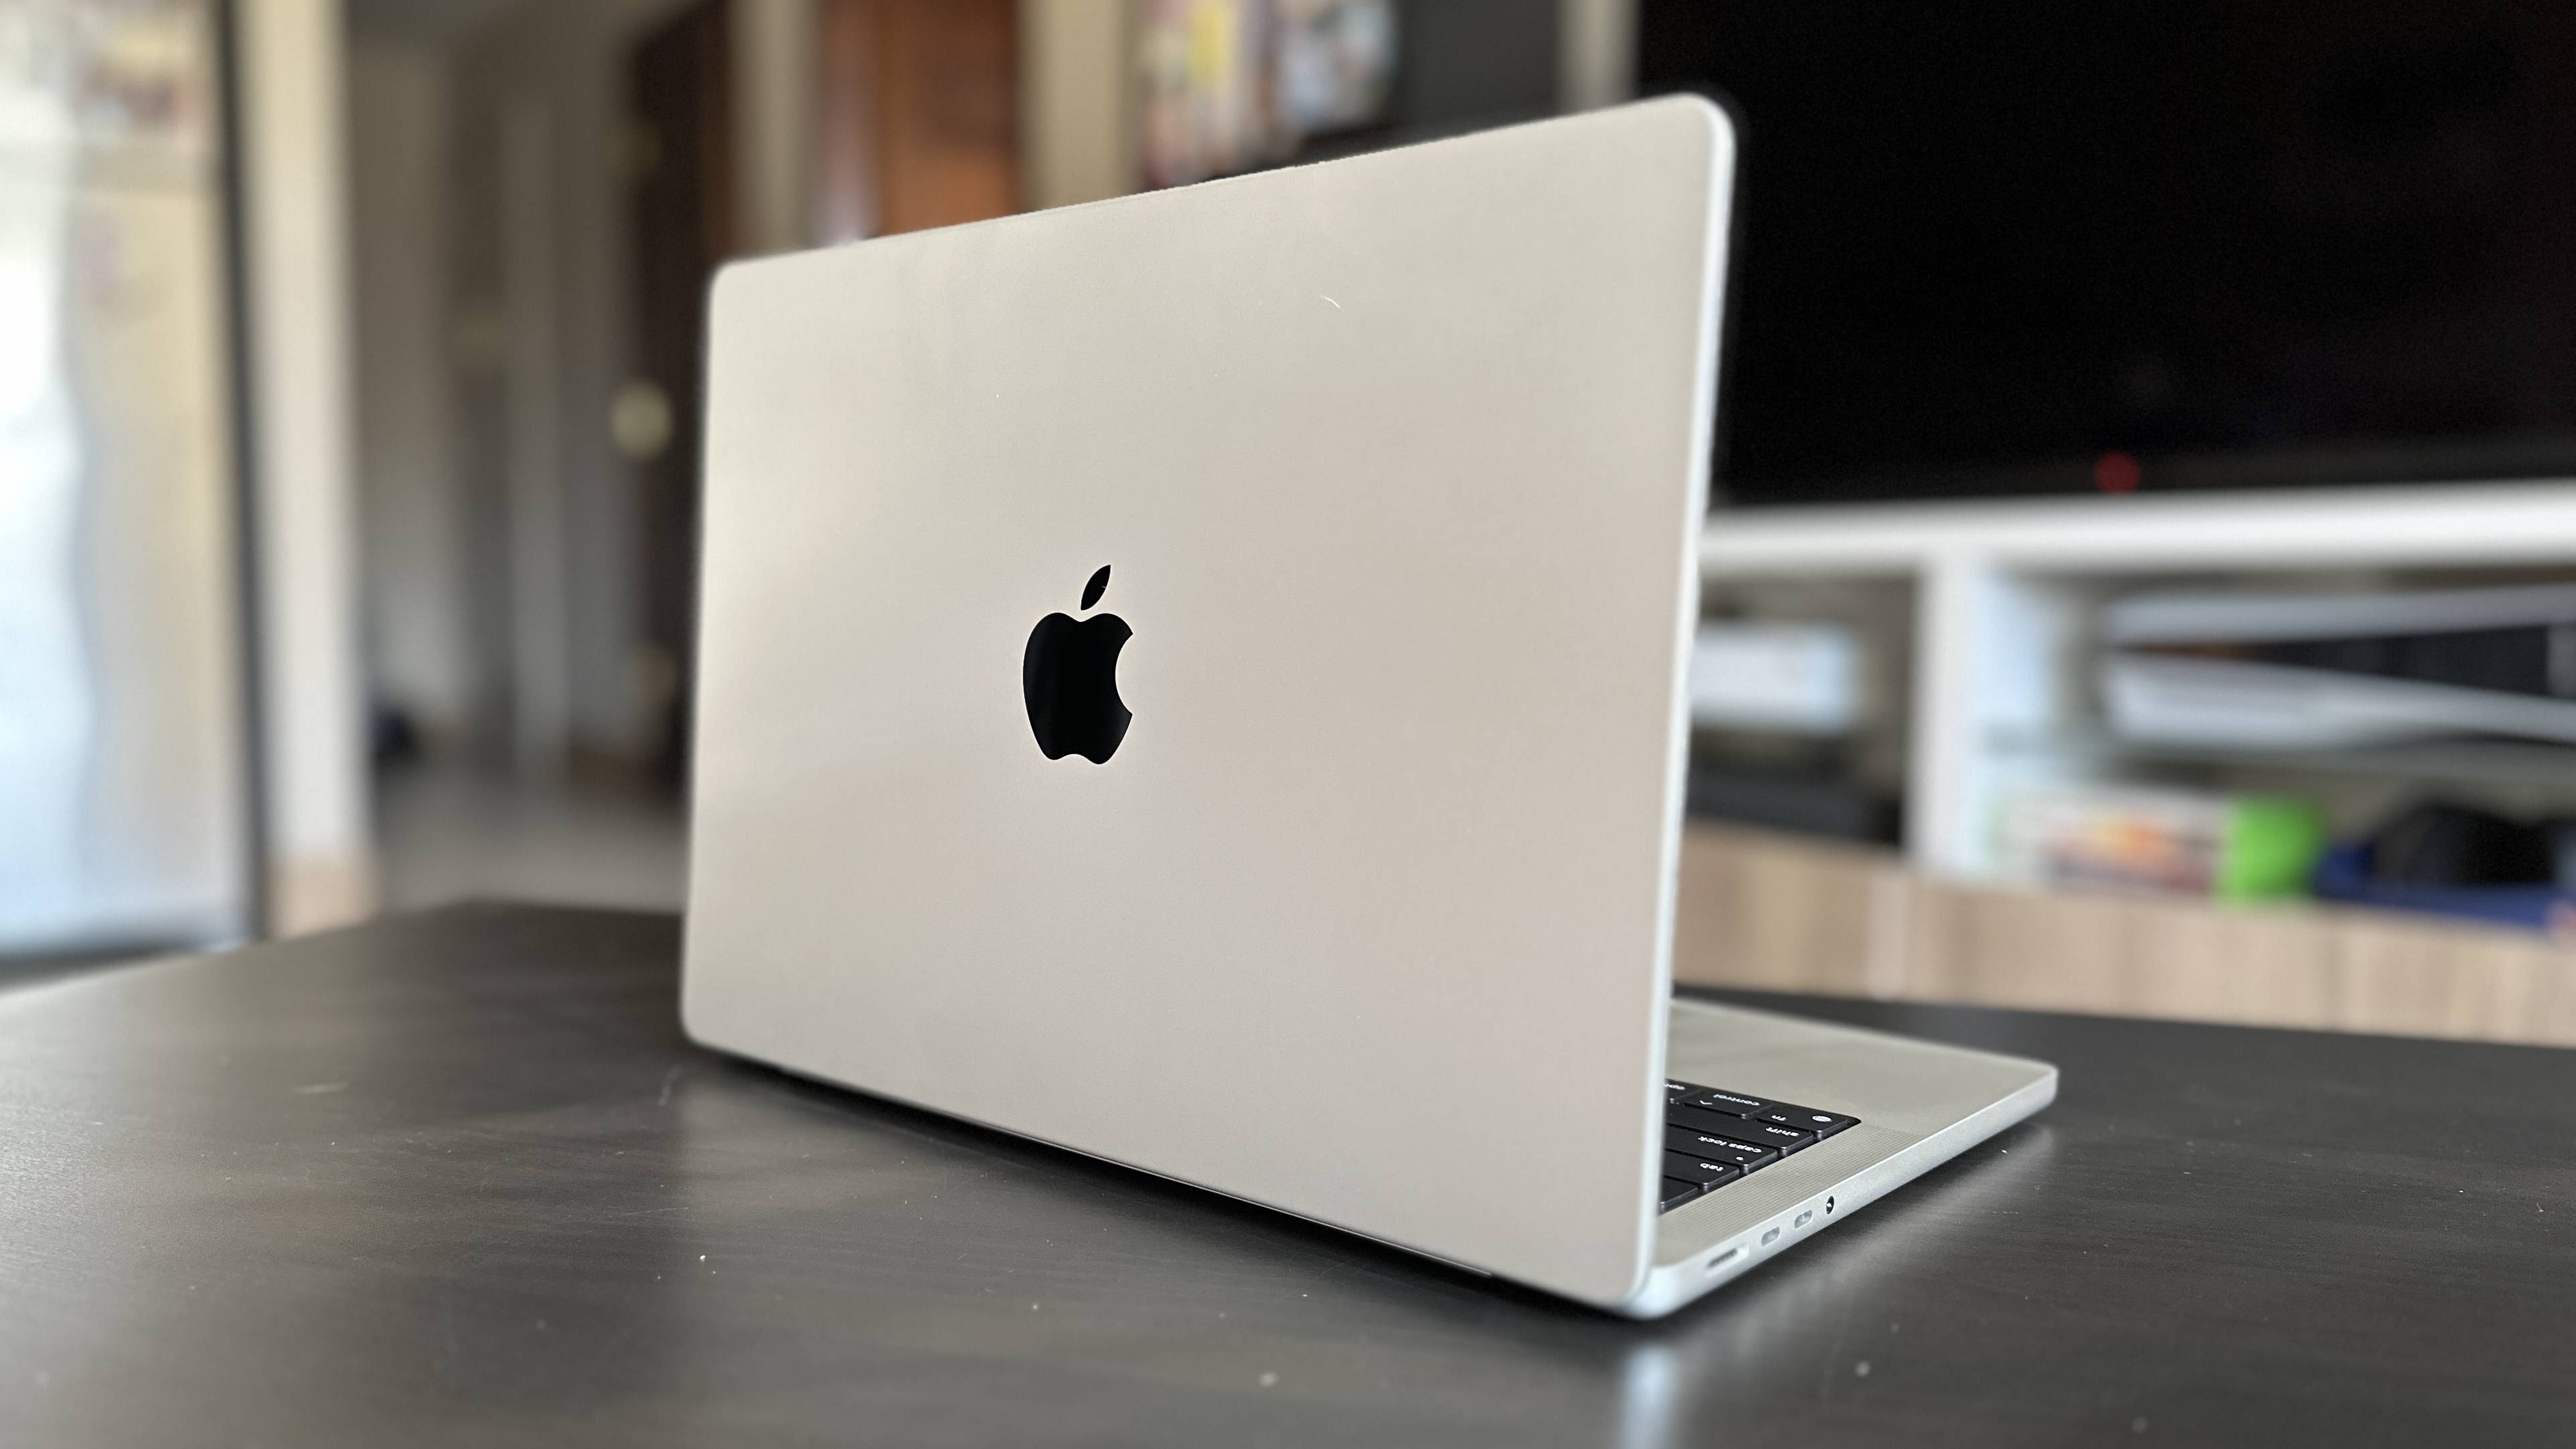 MacBook Pro 14-Inch (2023) review